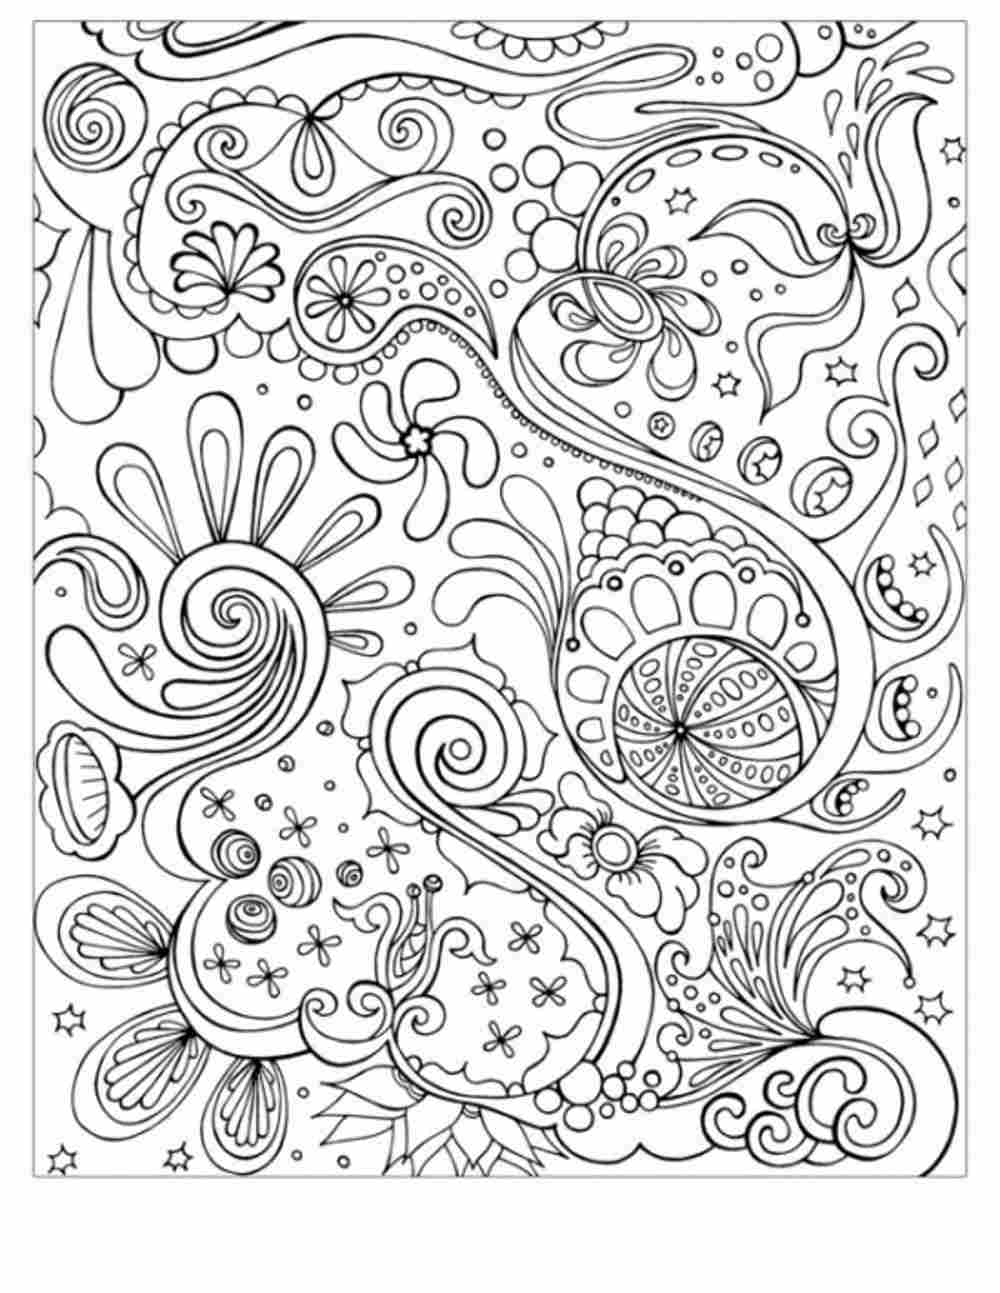 Free Printable Mandala Coloring Pages Adults Paisley Mandala Coloring Pages At Getdrawings Free For